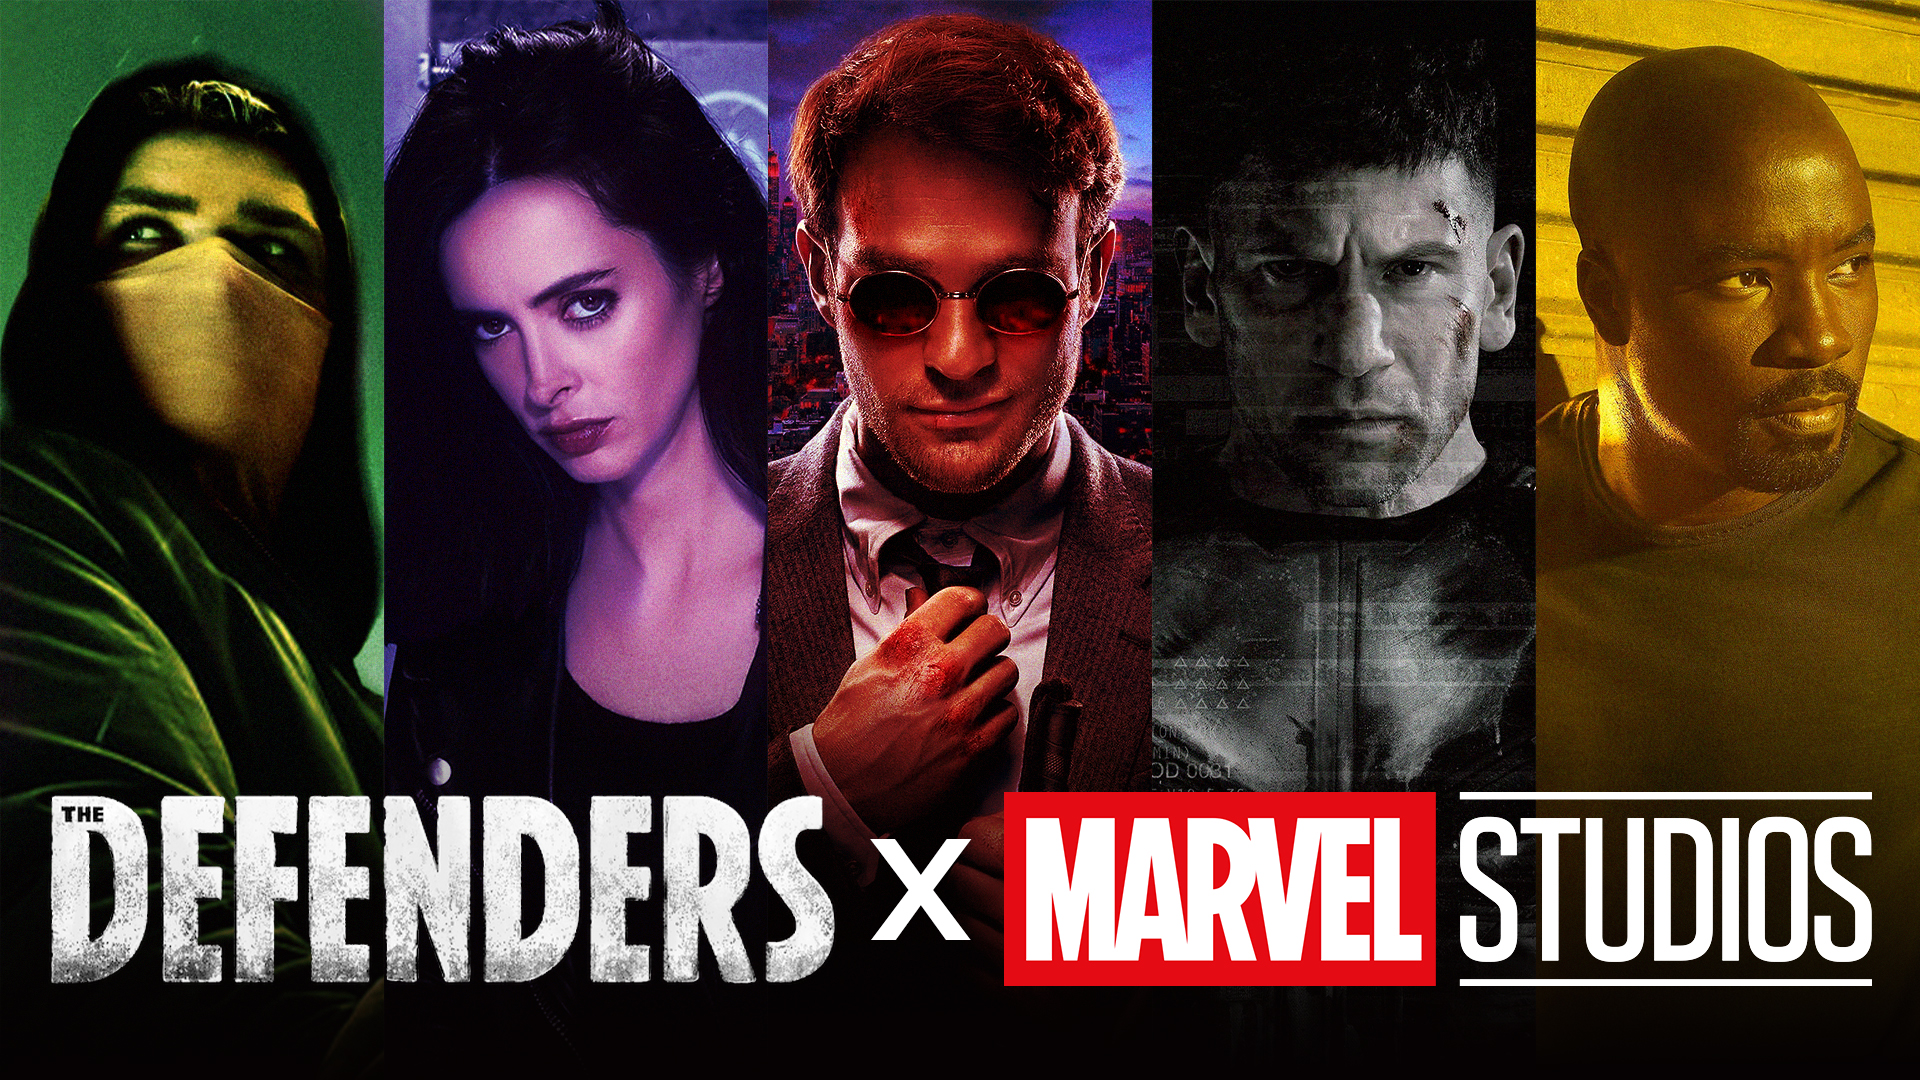 Marvel Cinematic Universe and the Defenders